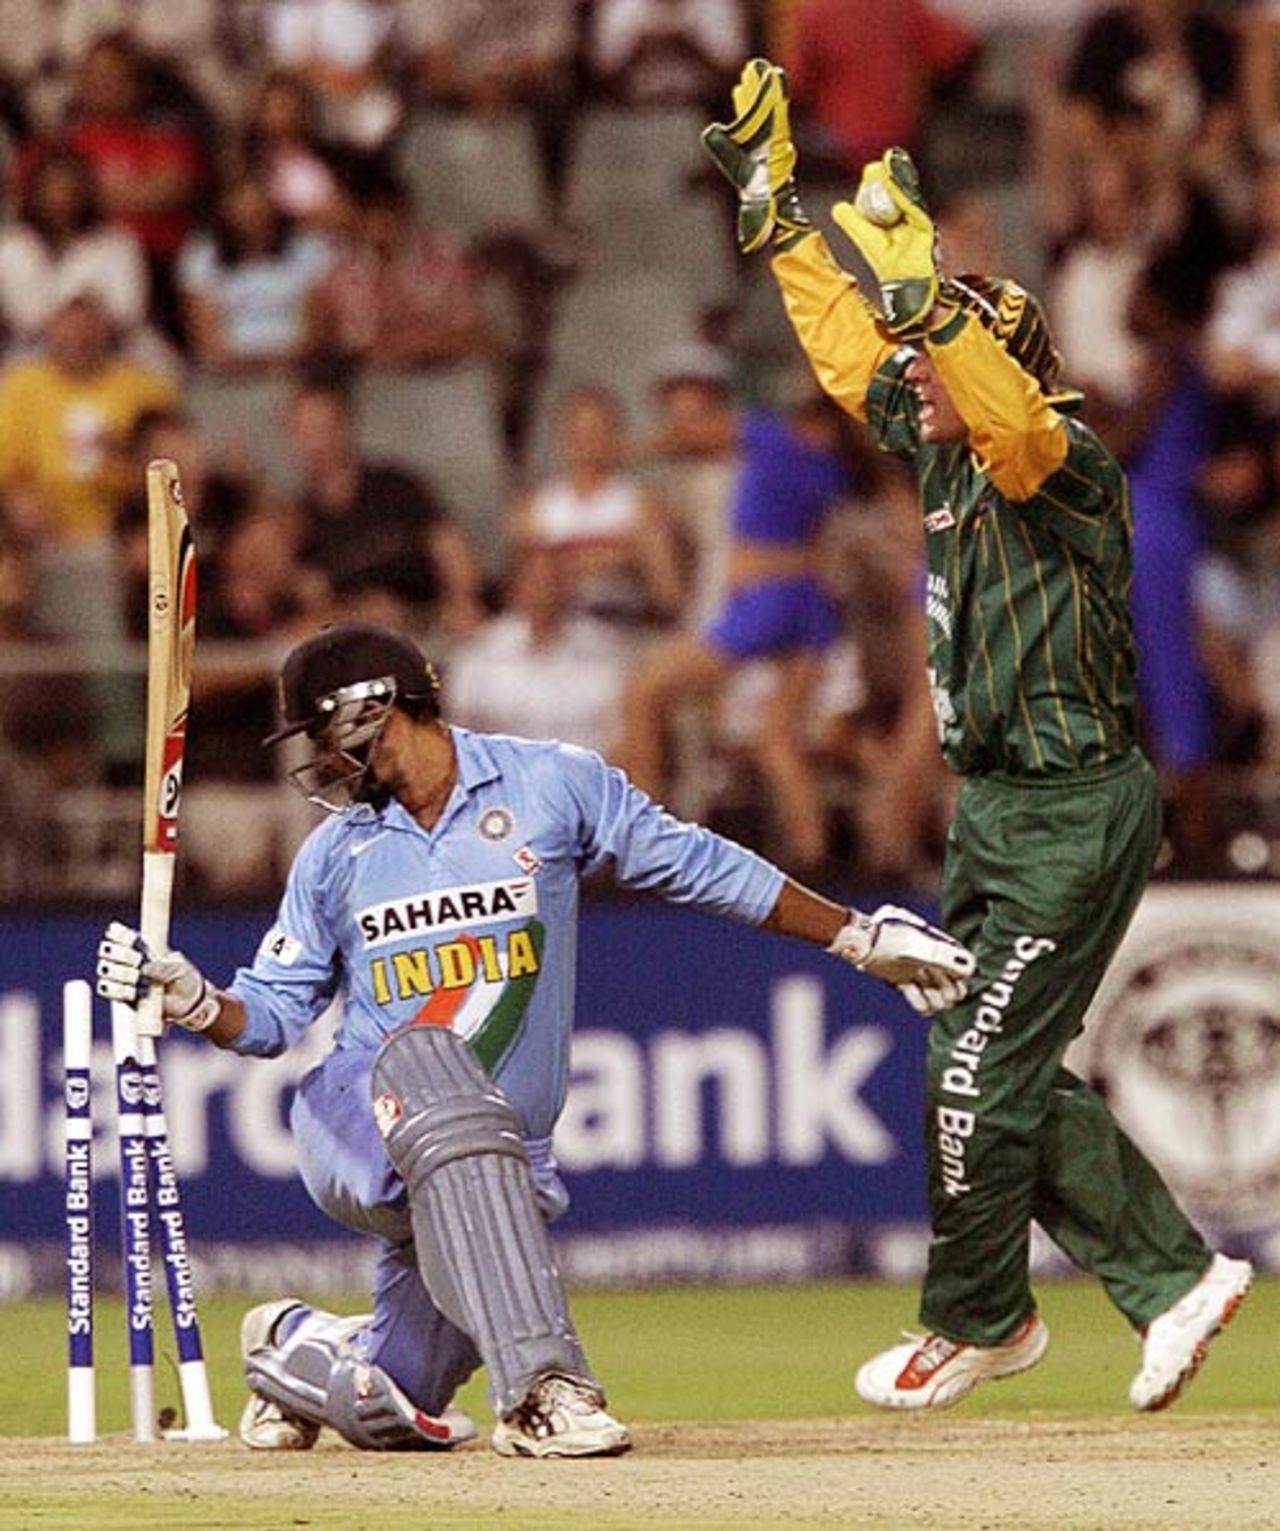 AB de Villiers appeals for a stumping against Dinesh Mongia, South Africa v India, Pro20, Johannesburg, December 1, 2006